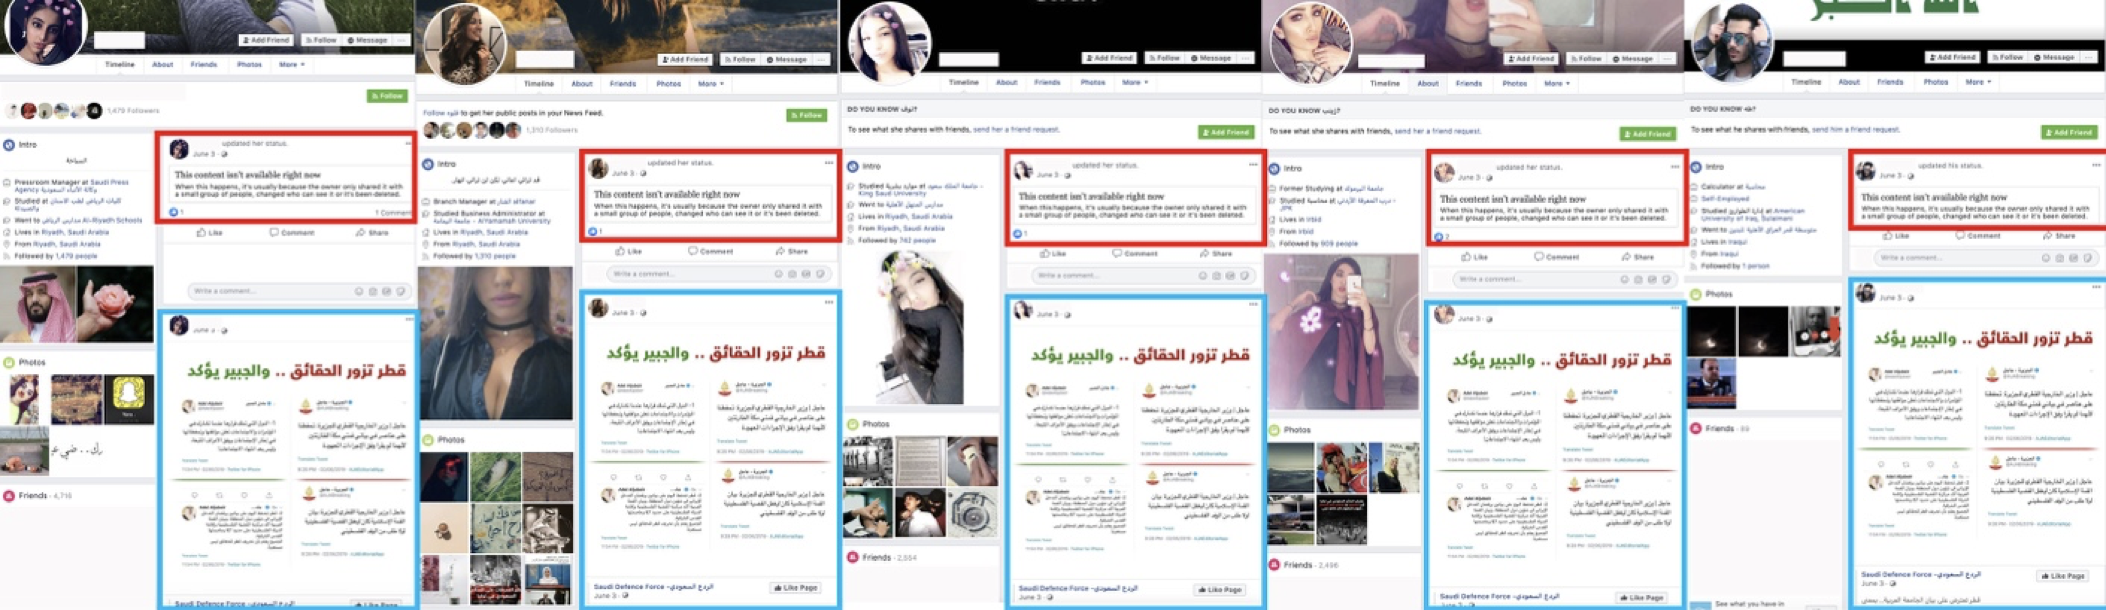 Royally Removed: Facebook Takes Down Pages Promoting Saudi Interests.